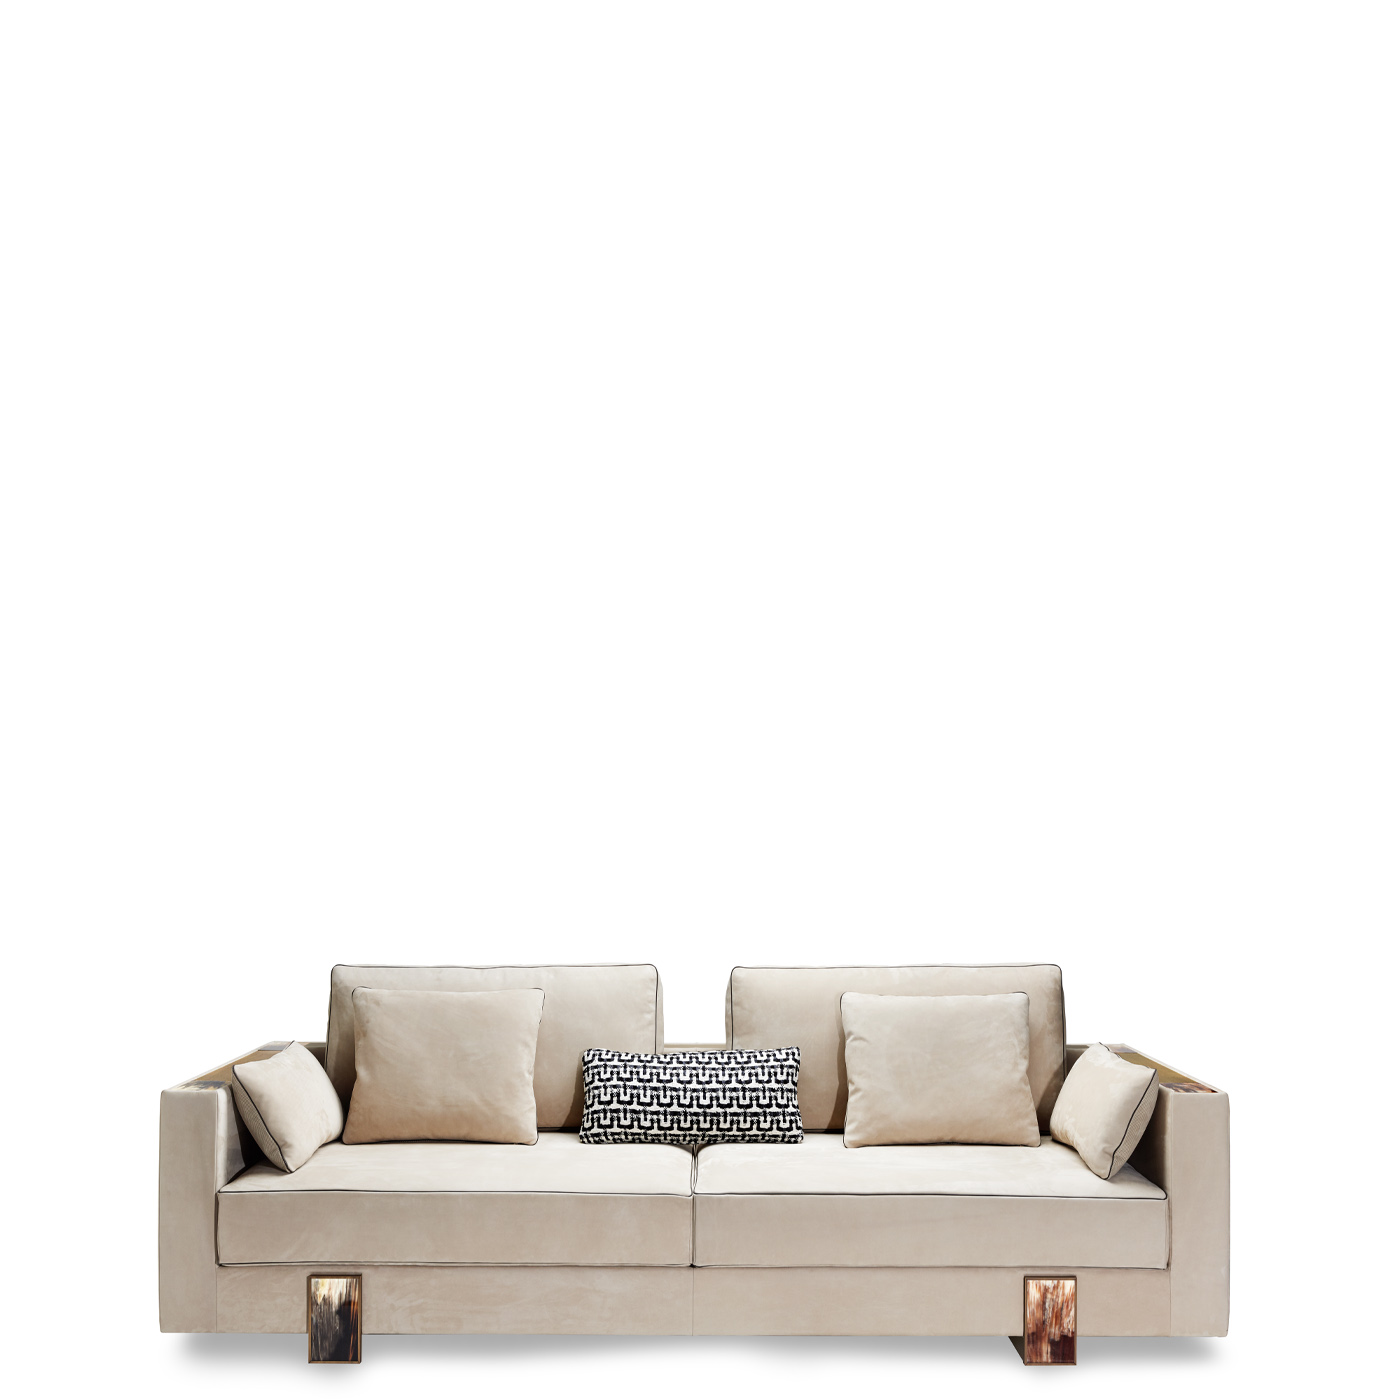 Sofas and seats - Adriano sofa in nabuk leather with horn details mod. 6036L - Arcahorn